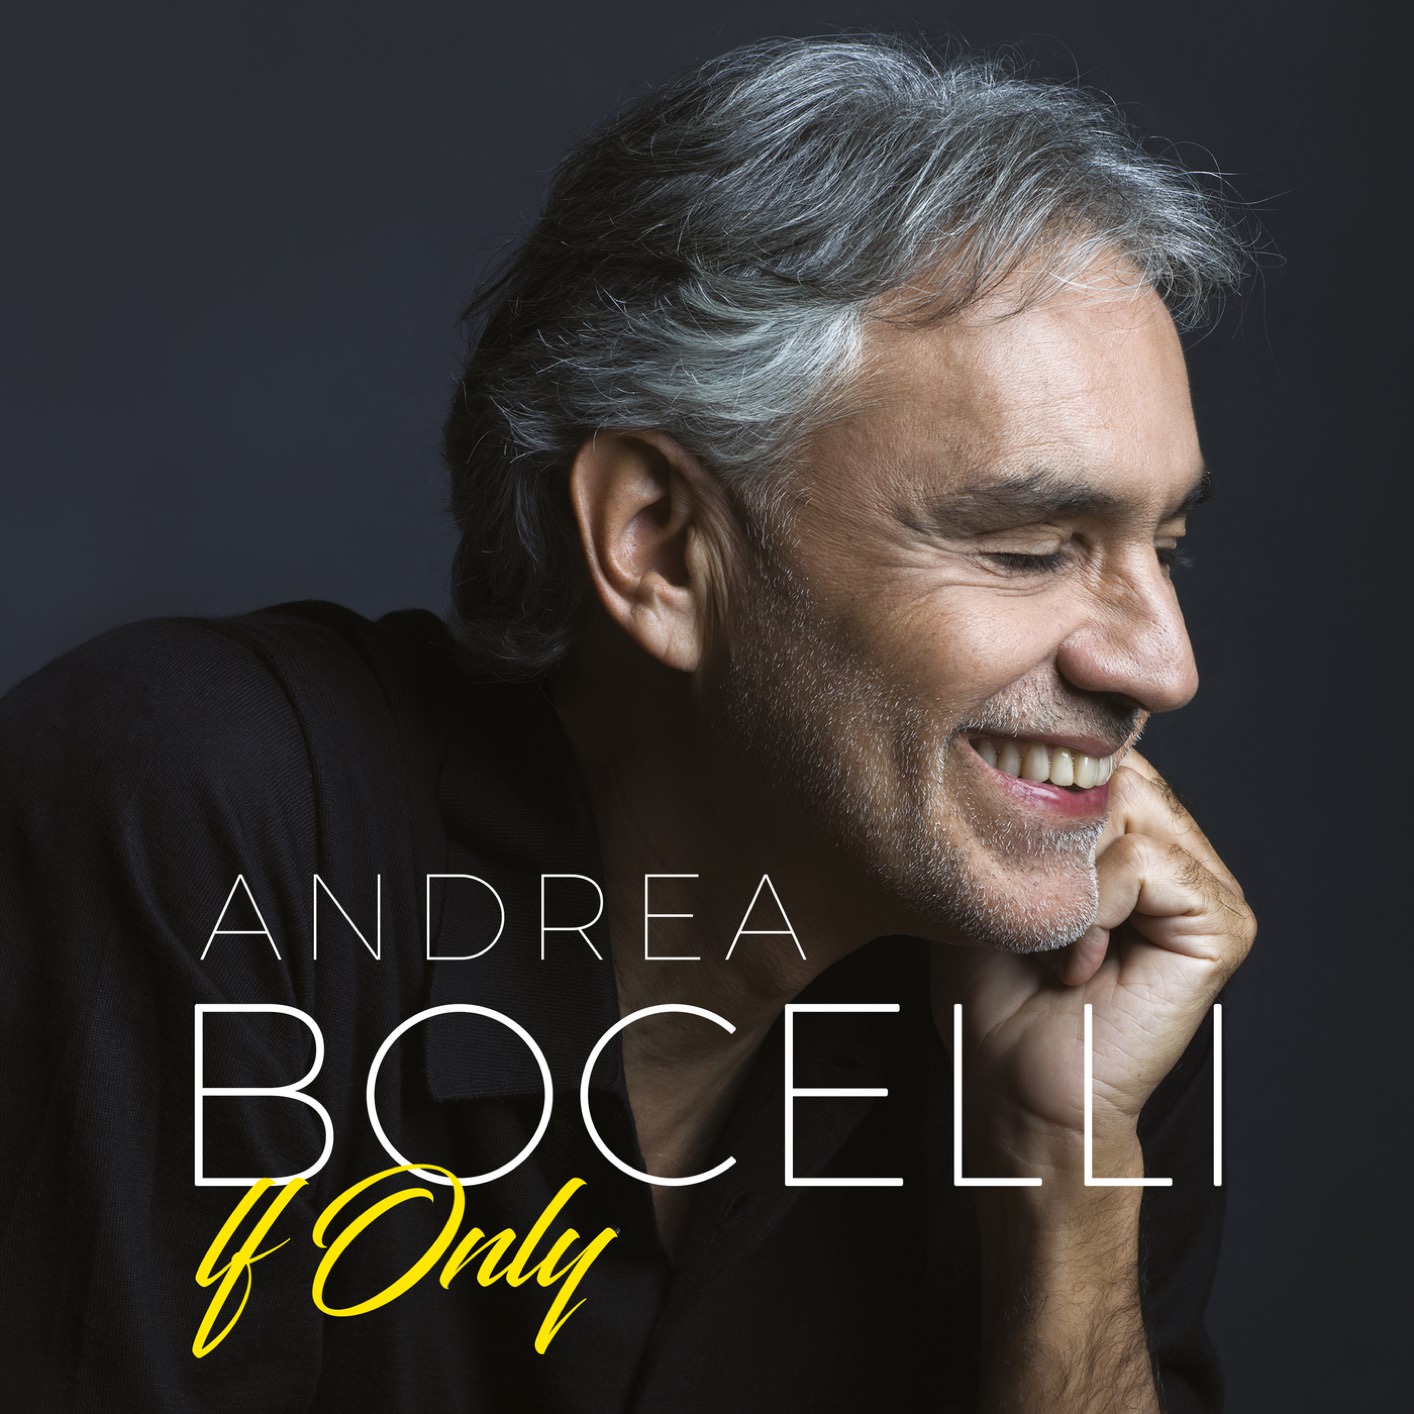 Andrea Bocelli – If Only (2018) [FLAC 24bit/96kHz]